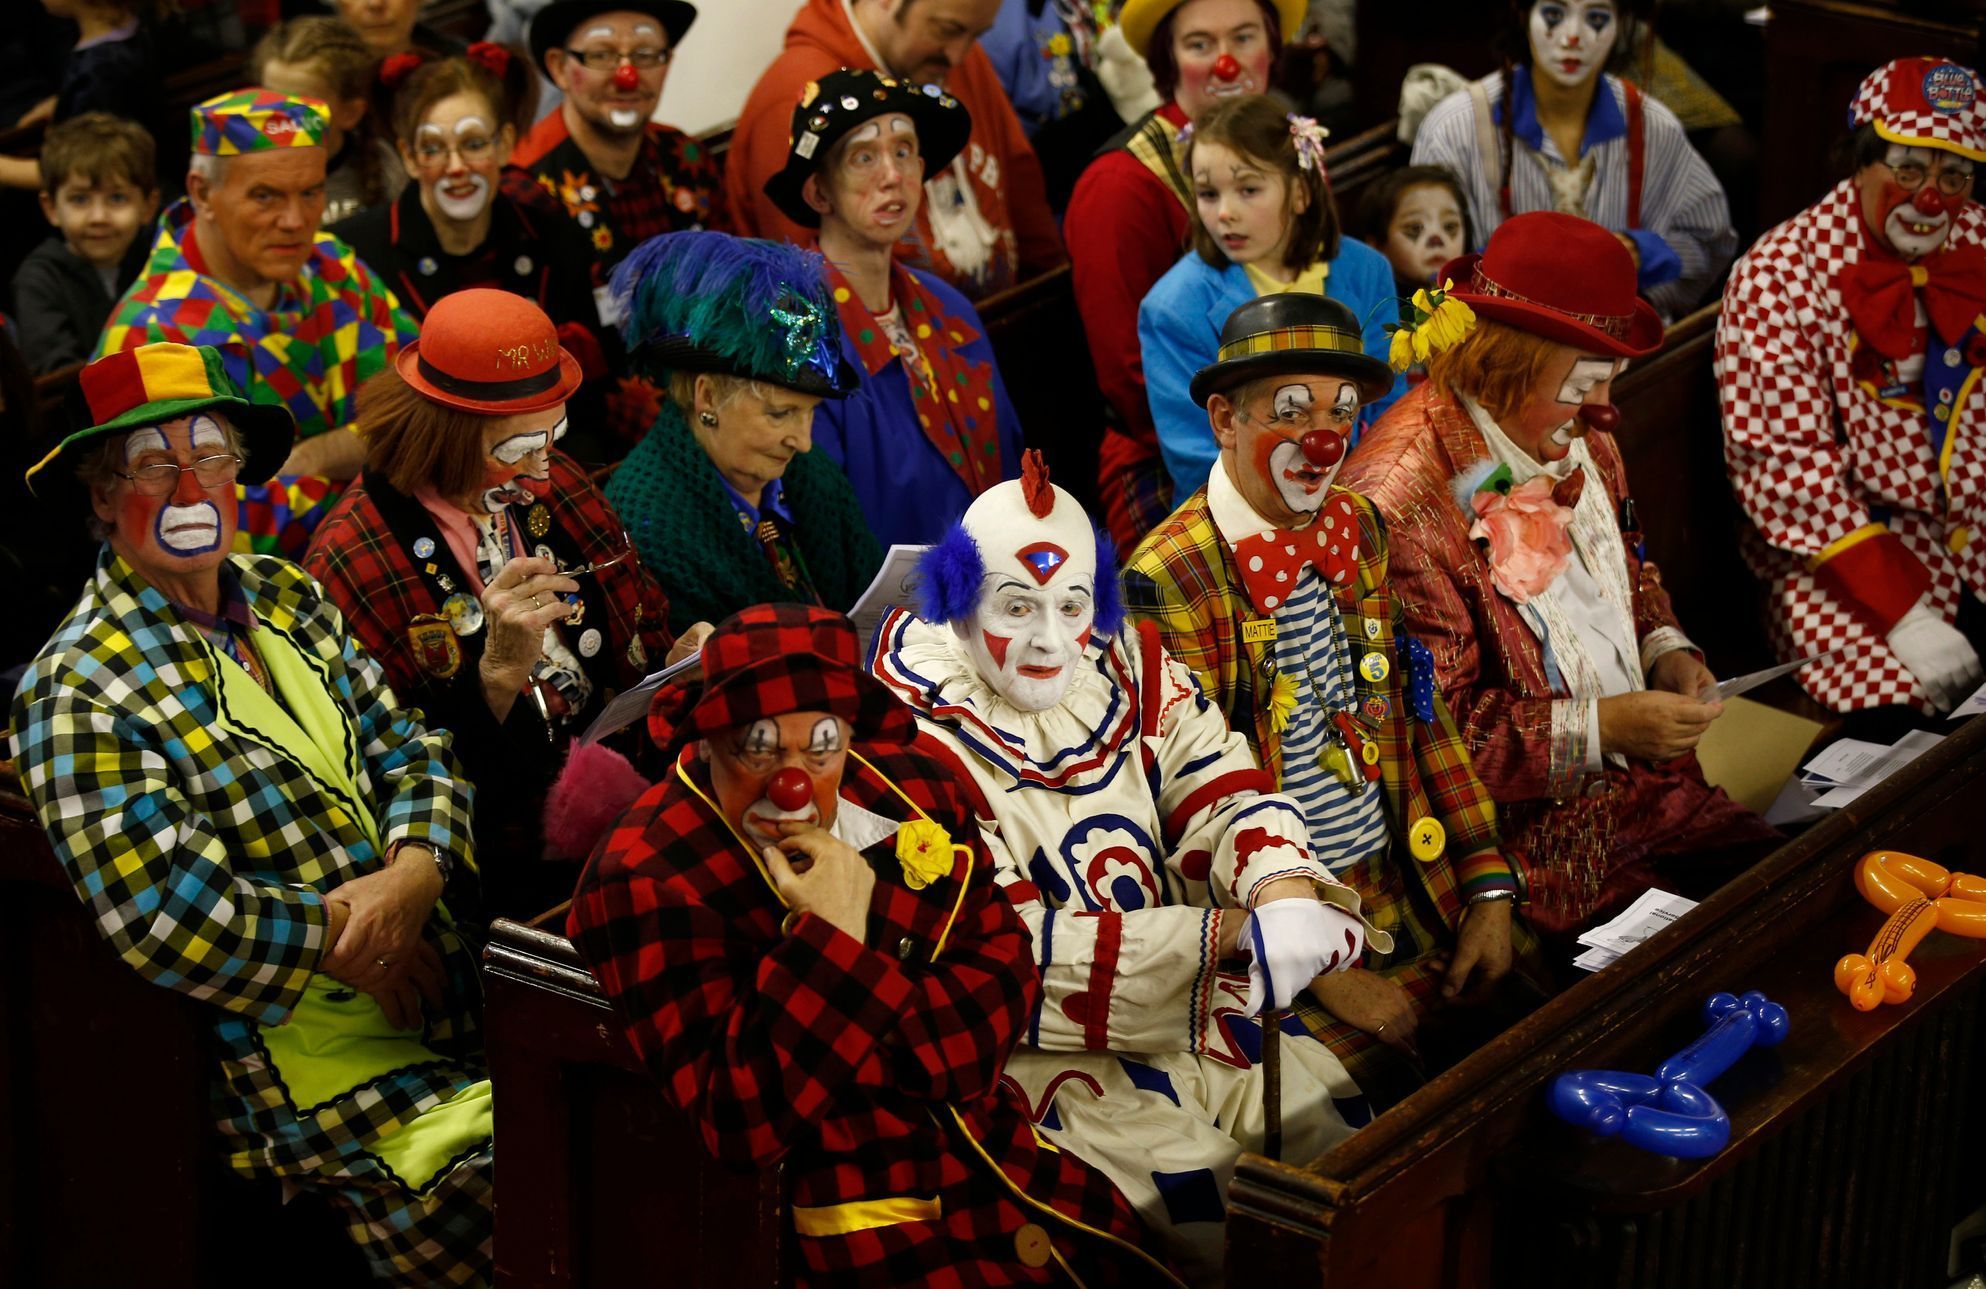 Clowns sit in the pews at the All Saints Church during the Grimaldi clown service in Dalston, north London